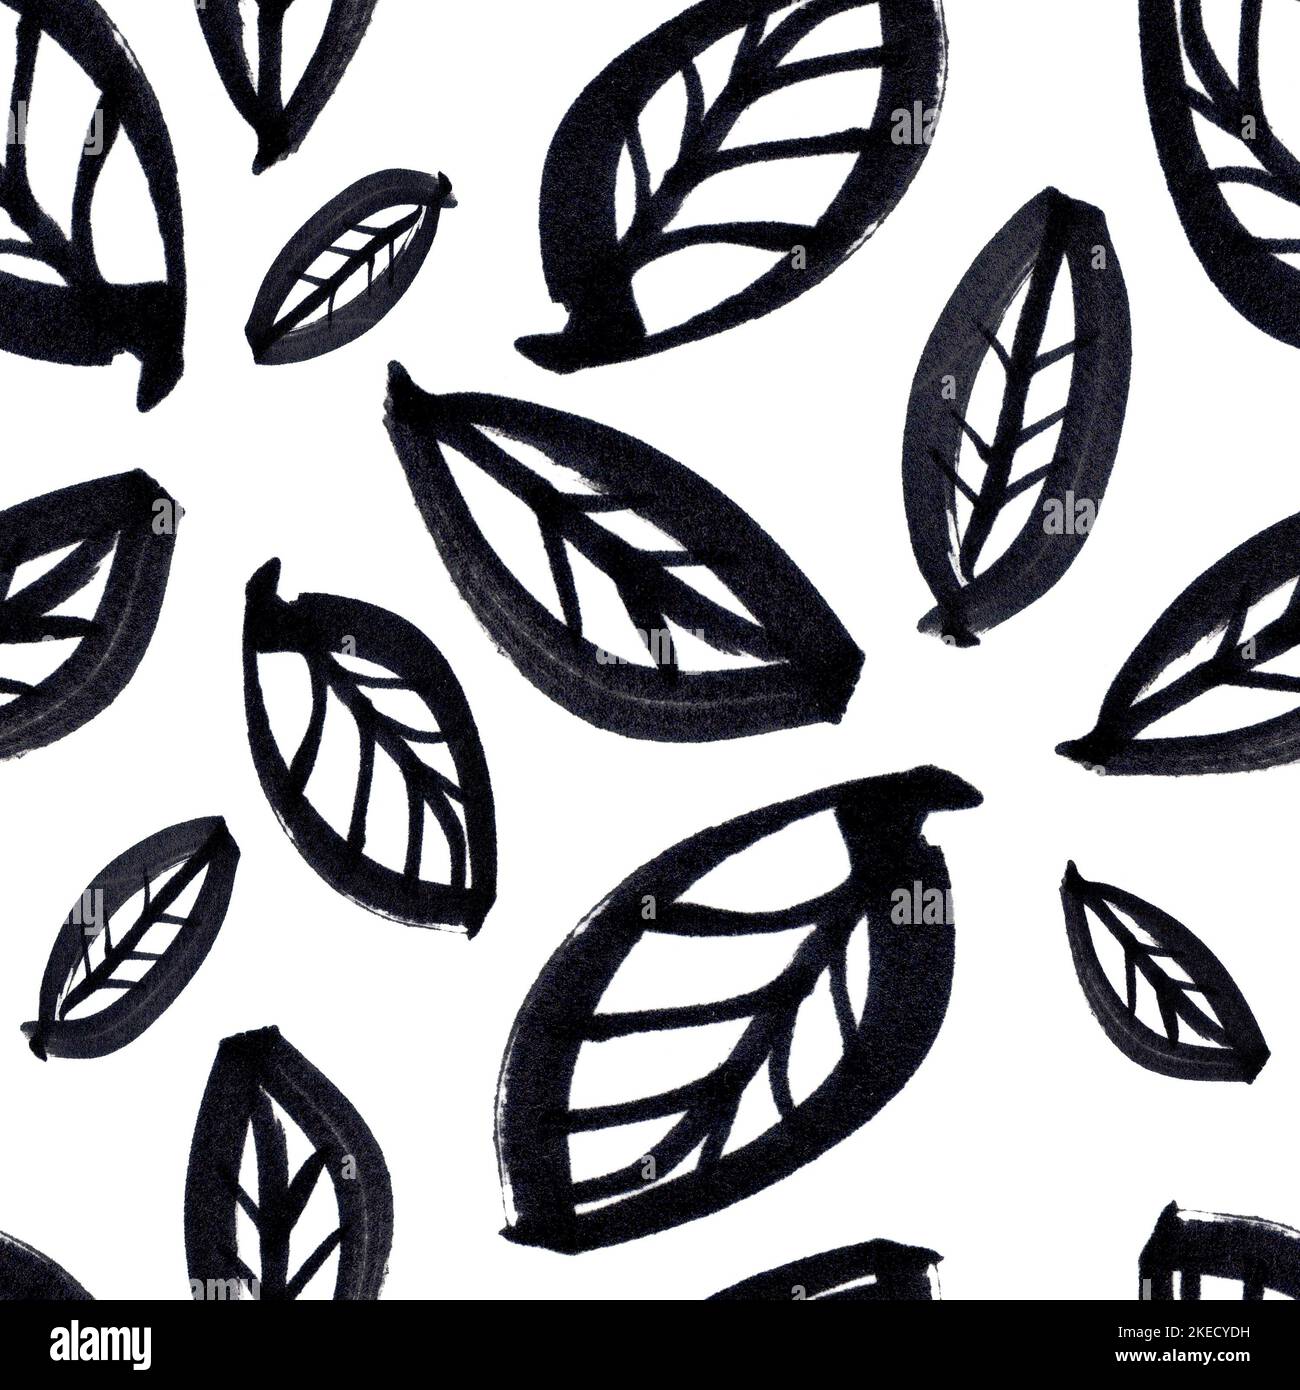 Hand drawn black and white seamless pattern with leaves Stock Photo